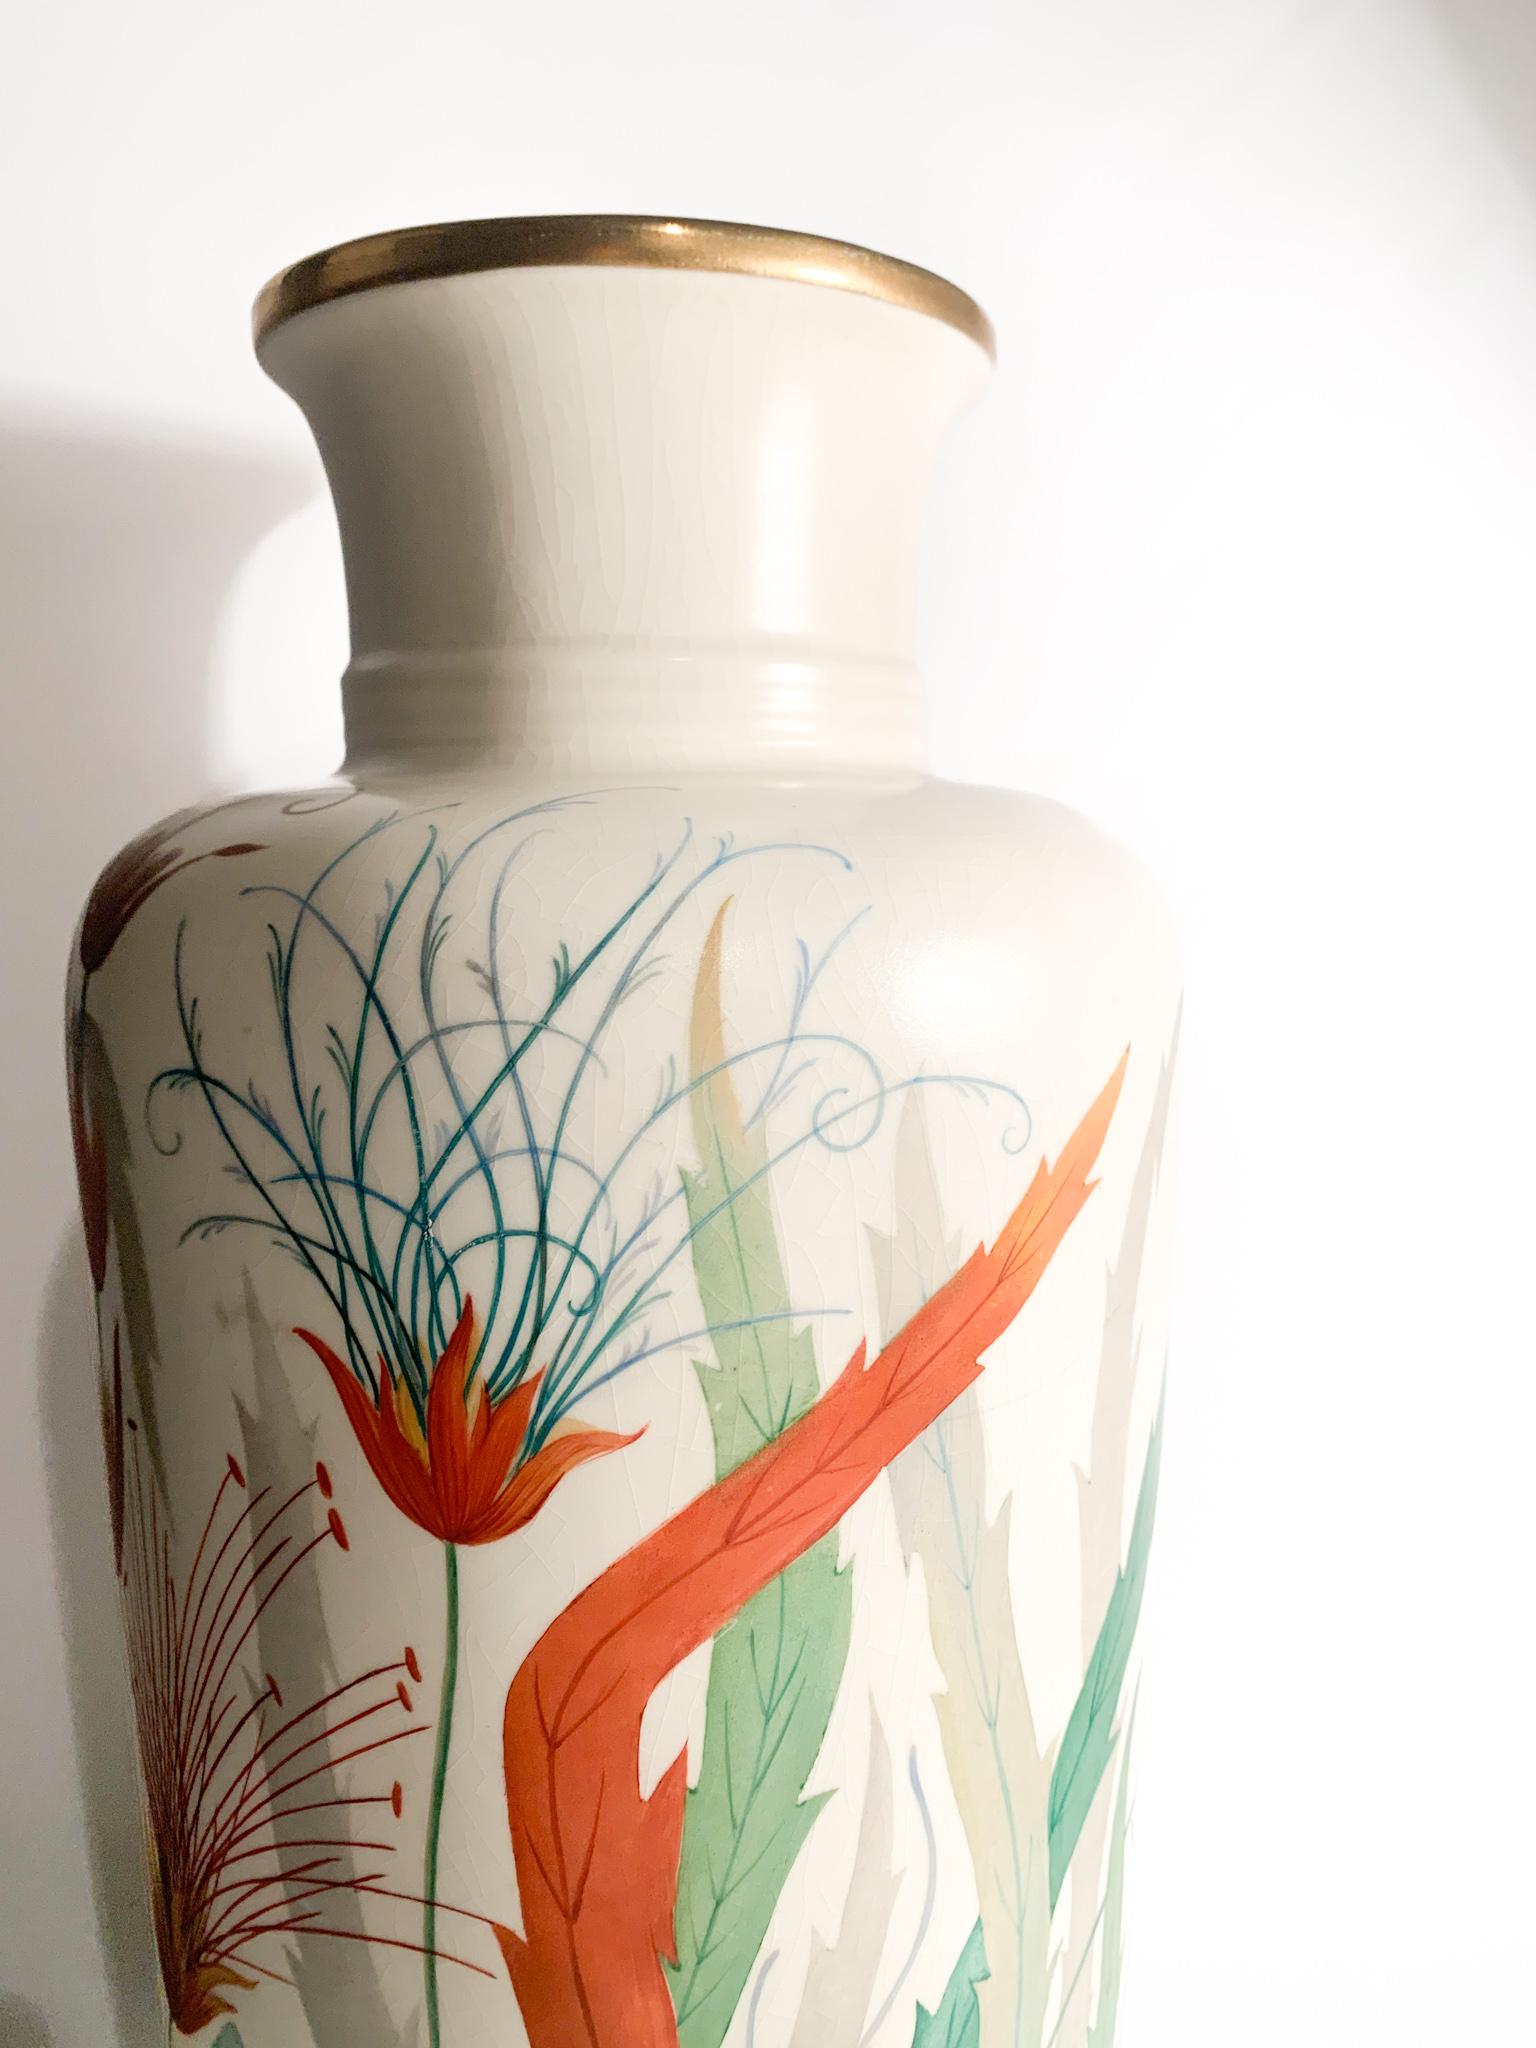 Art Deco Porcelain Vase by Richard Ginori Hand Painted from the 1920s For Sale